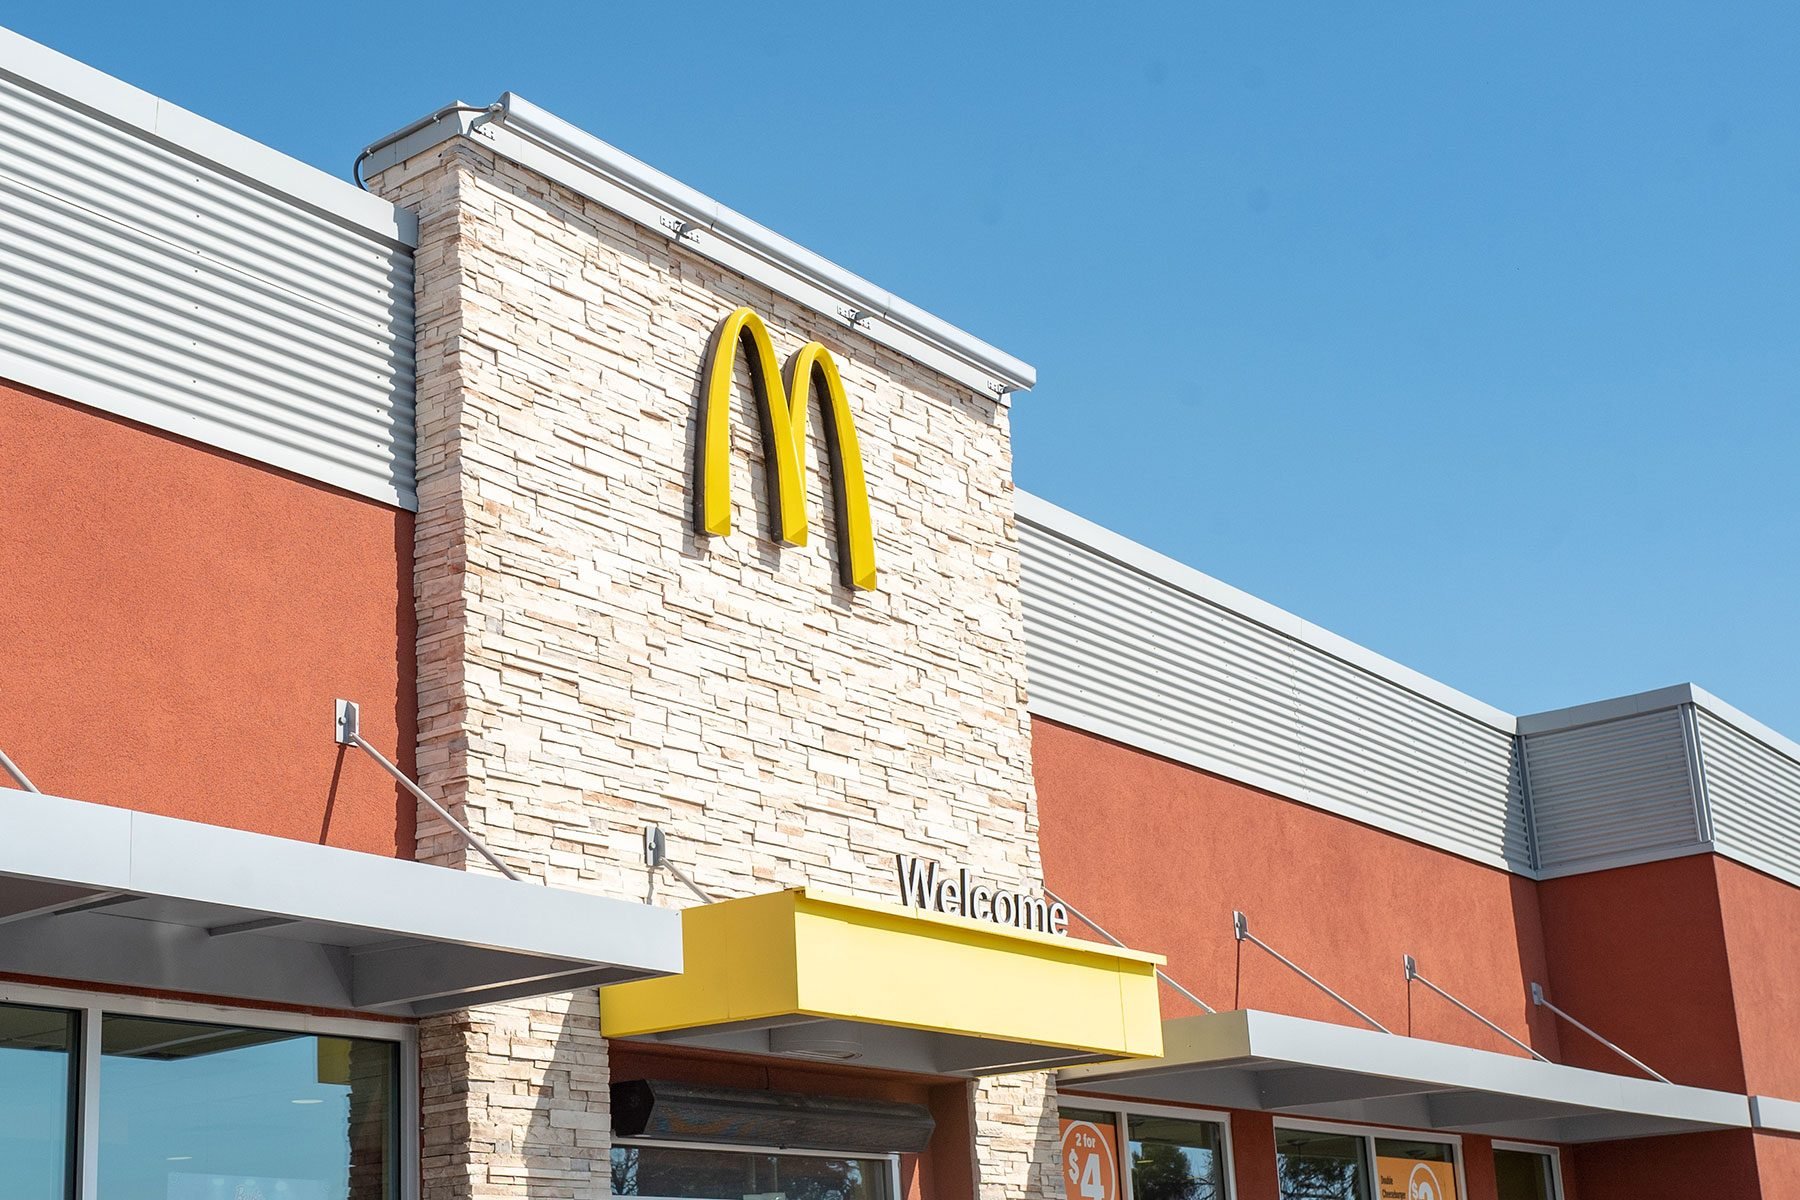 Facade of newly renovated McDonald's fast food restaurant, along the Interstate 5 freeway in Coalinga, California